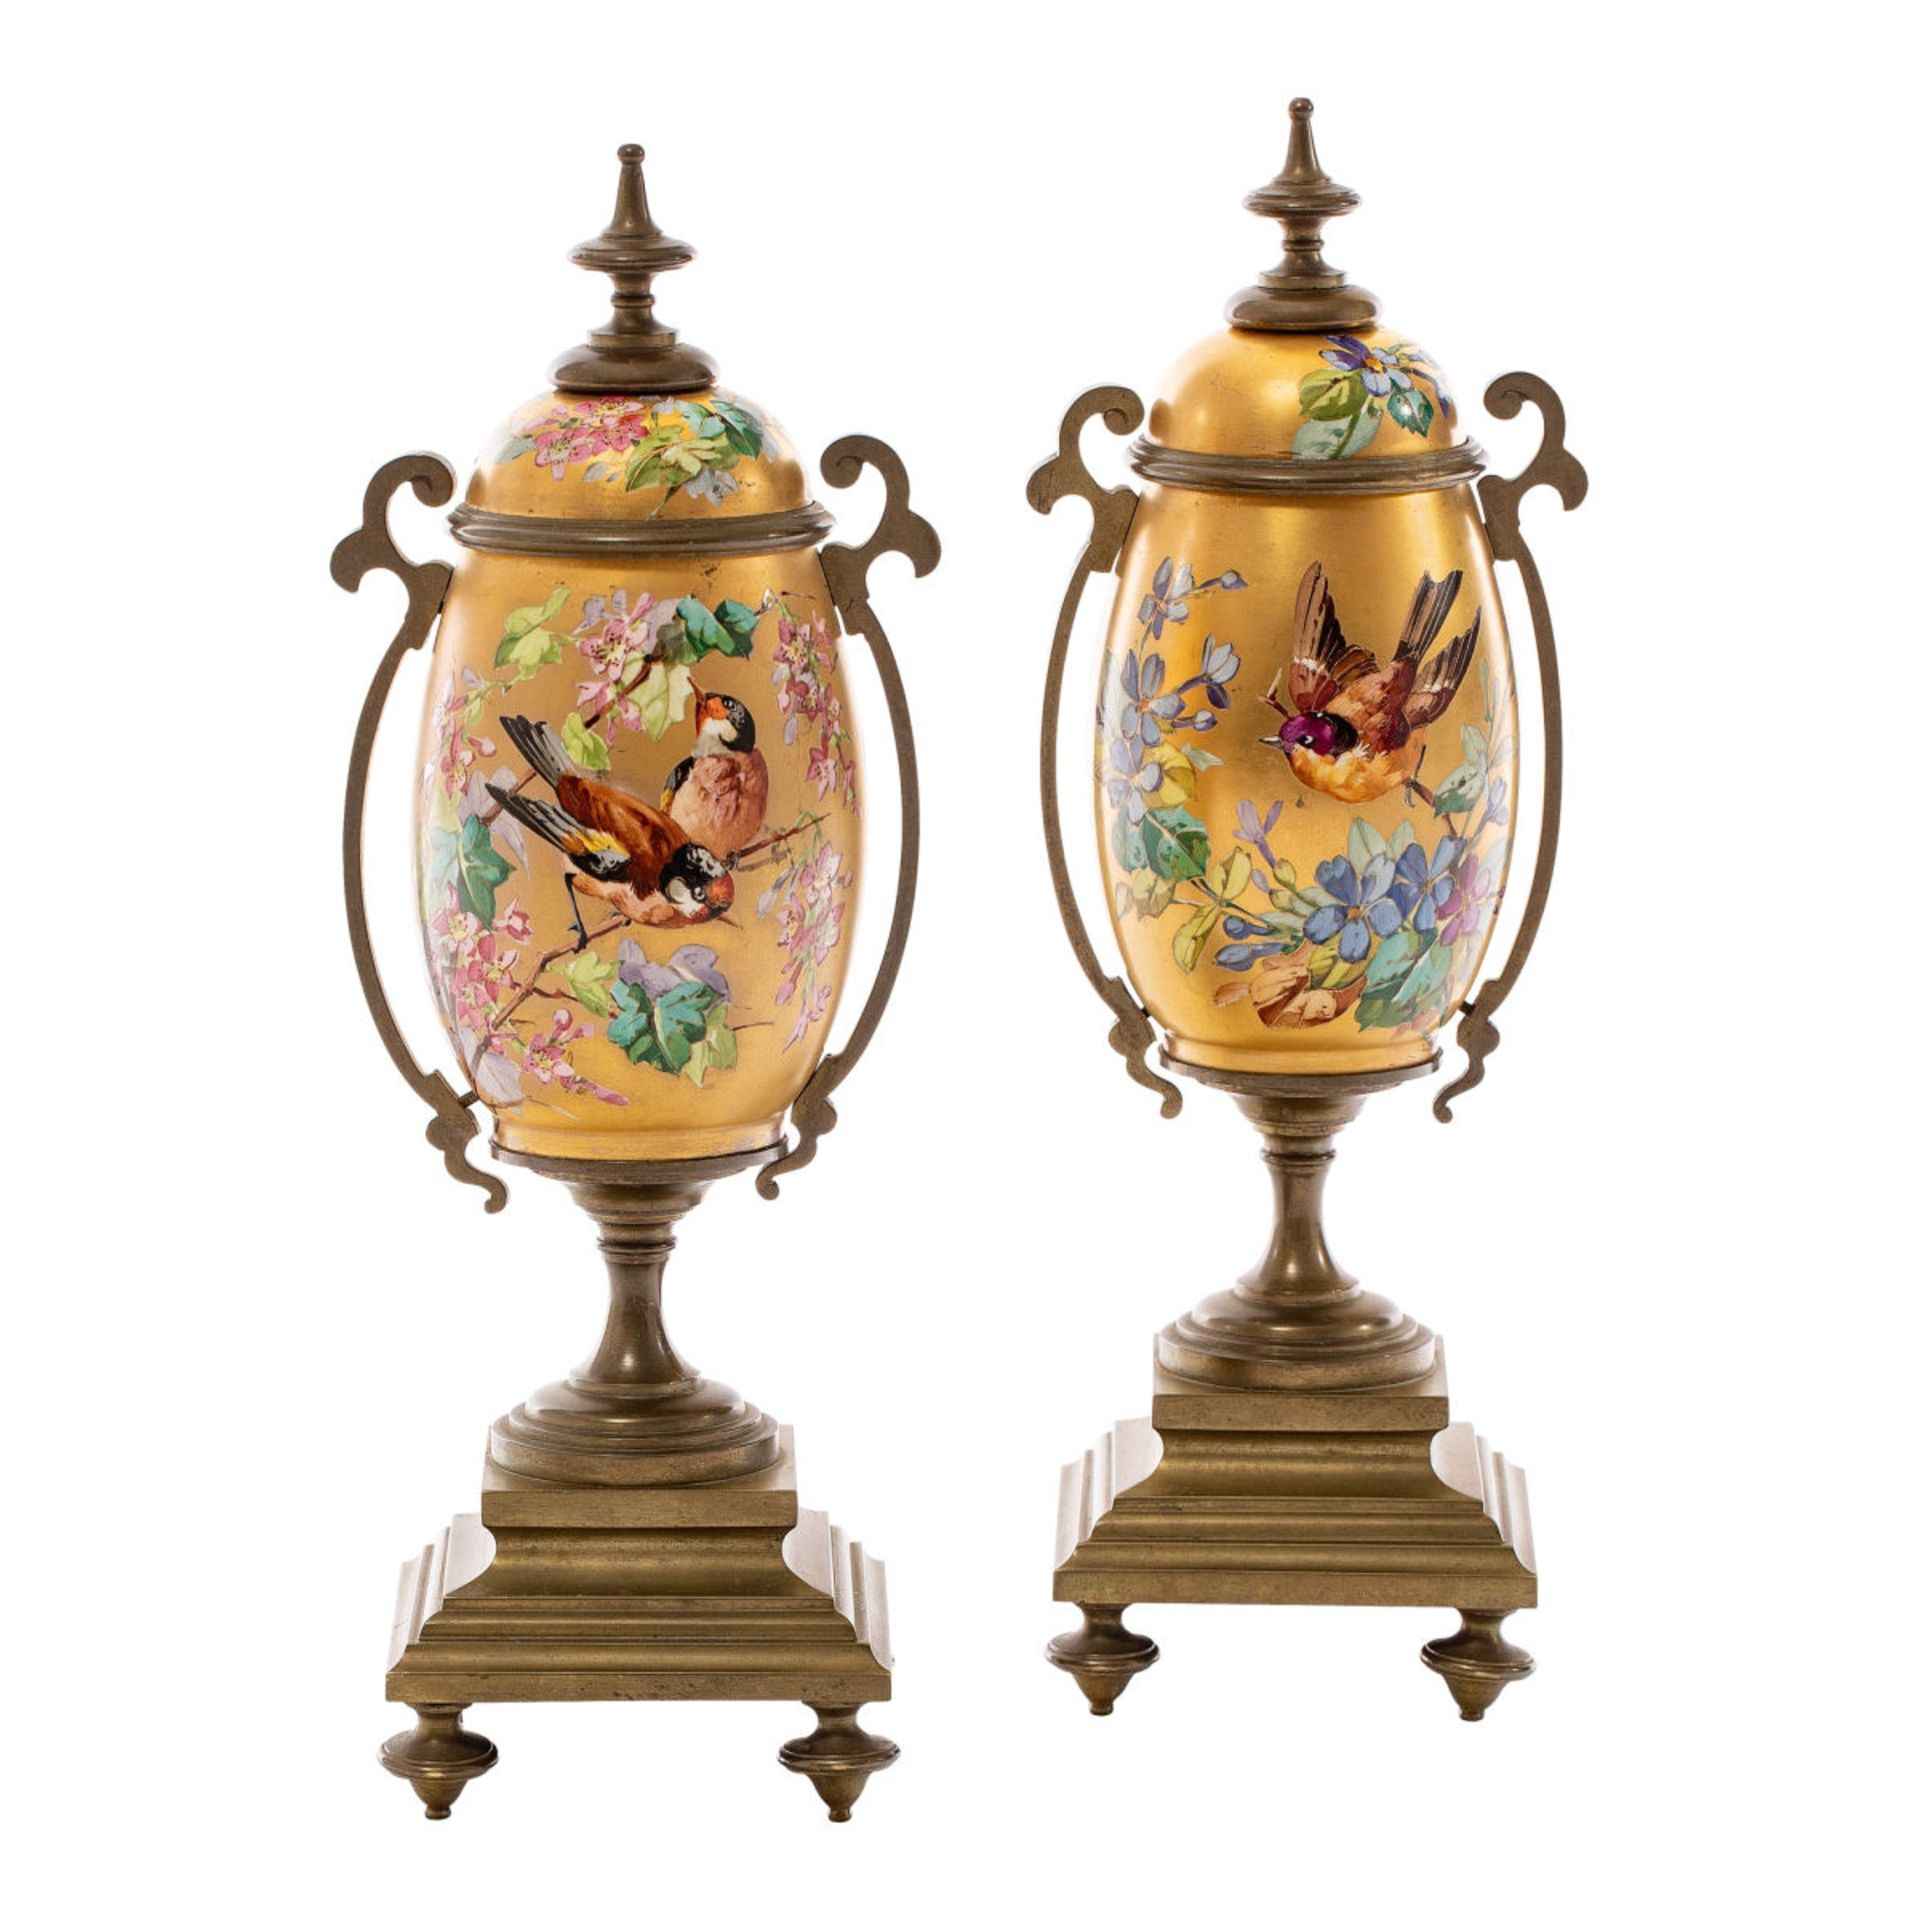 Pair of decorative vases with gold background